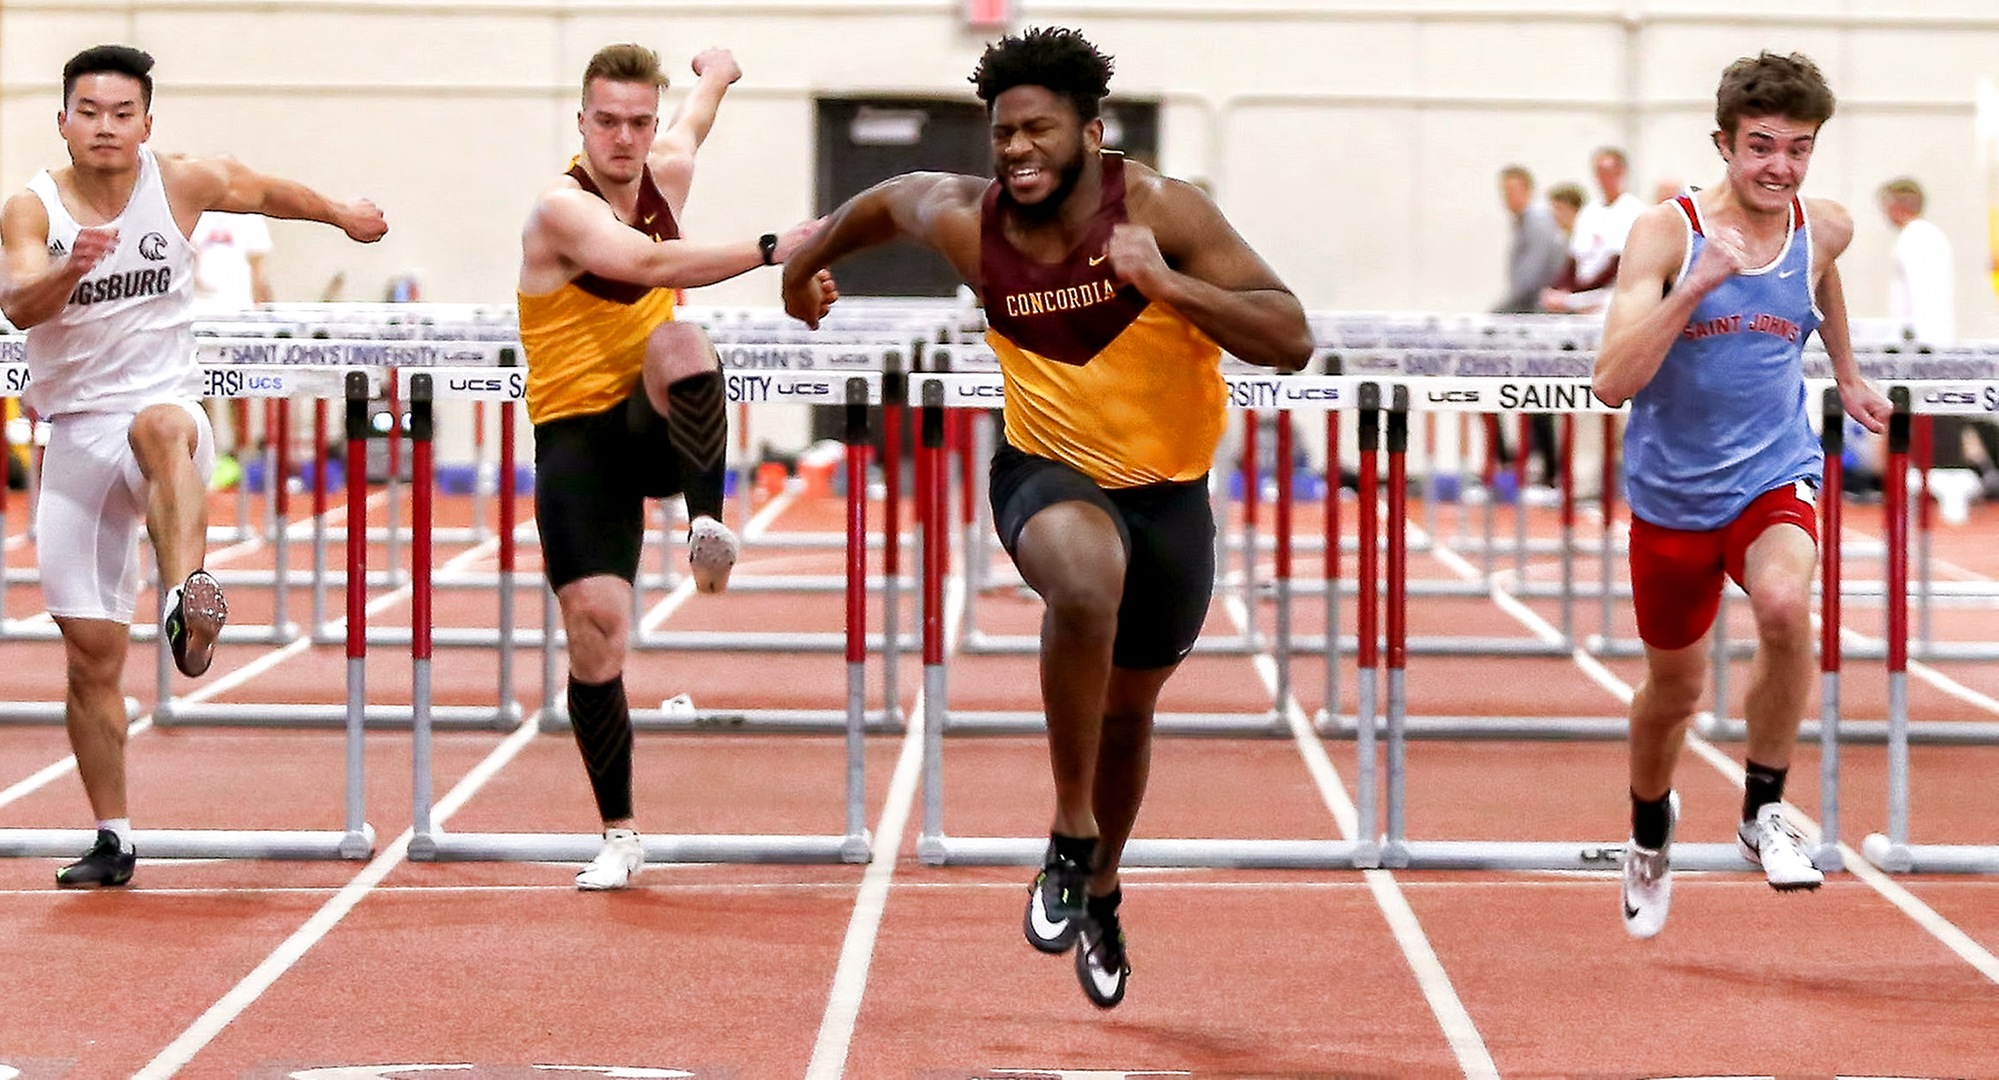 Willie Julkes stretches for the finish line in the prelims of the 60-meter hurdles at the MIAC Indoor Meet. He went on to set a school record in the finals of the event. (Photo courtesy of Nathan Lodermeier)